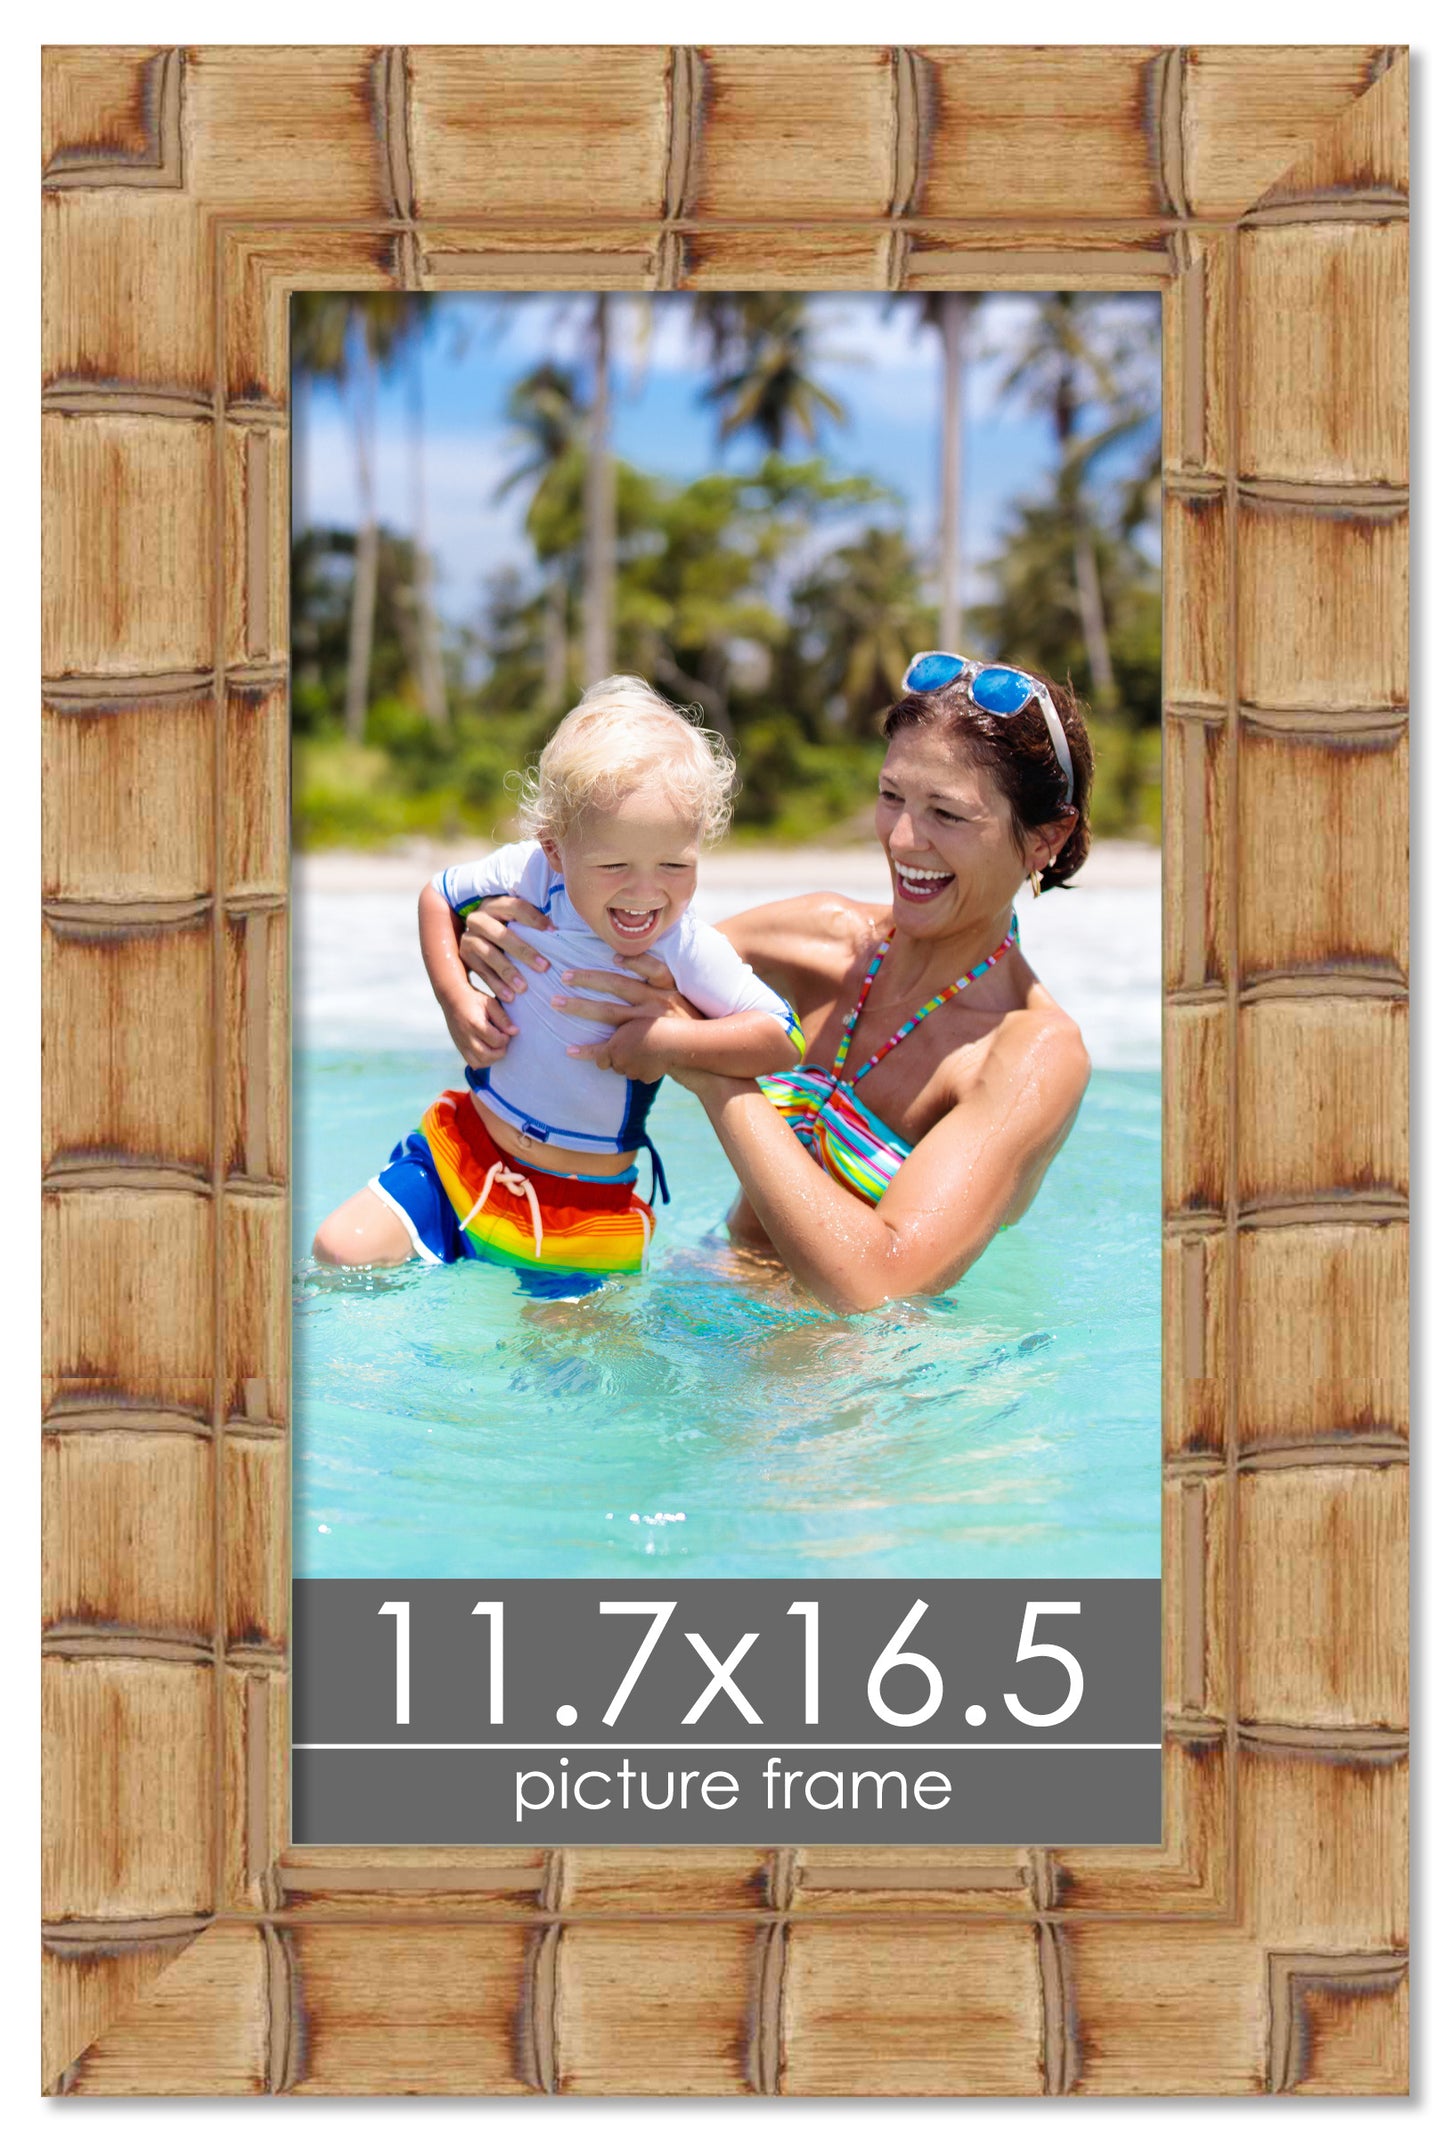 Bamboo Natural Wood Picture Frame